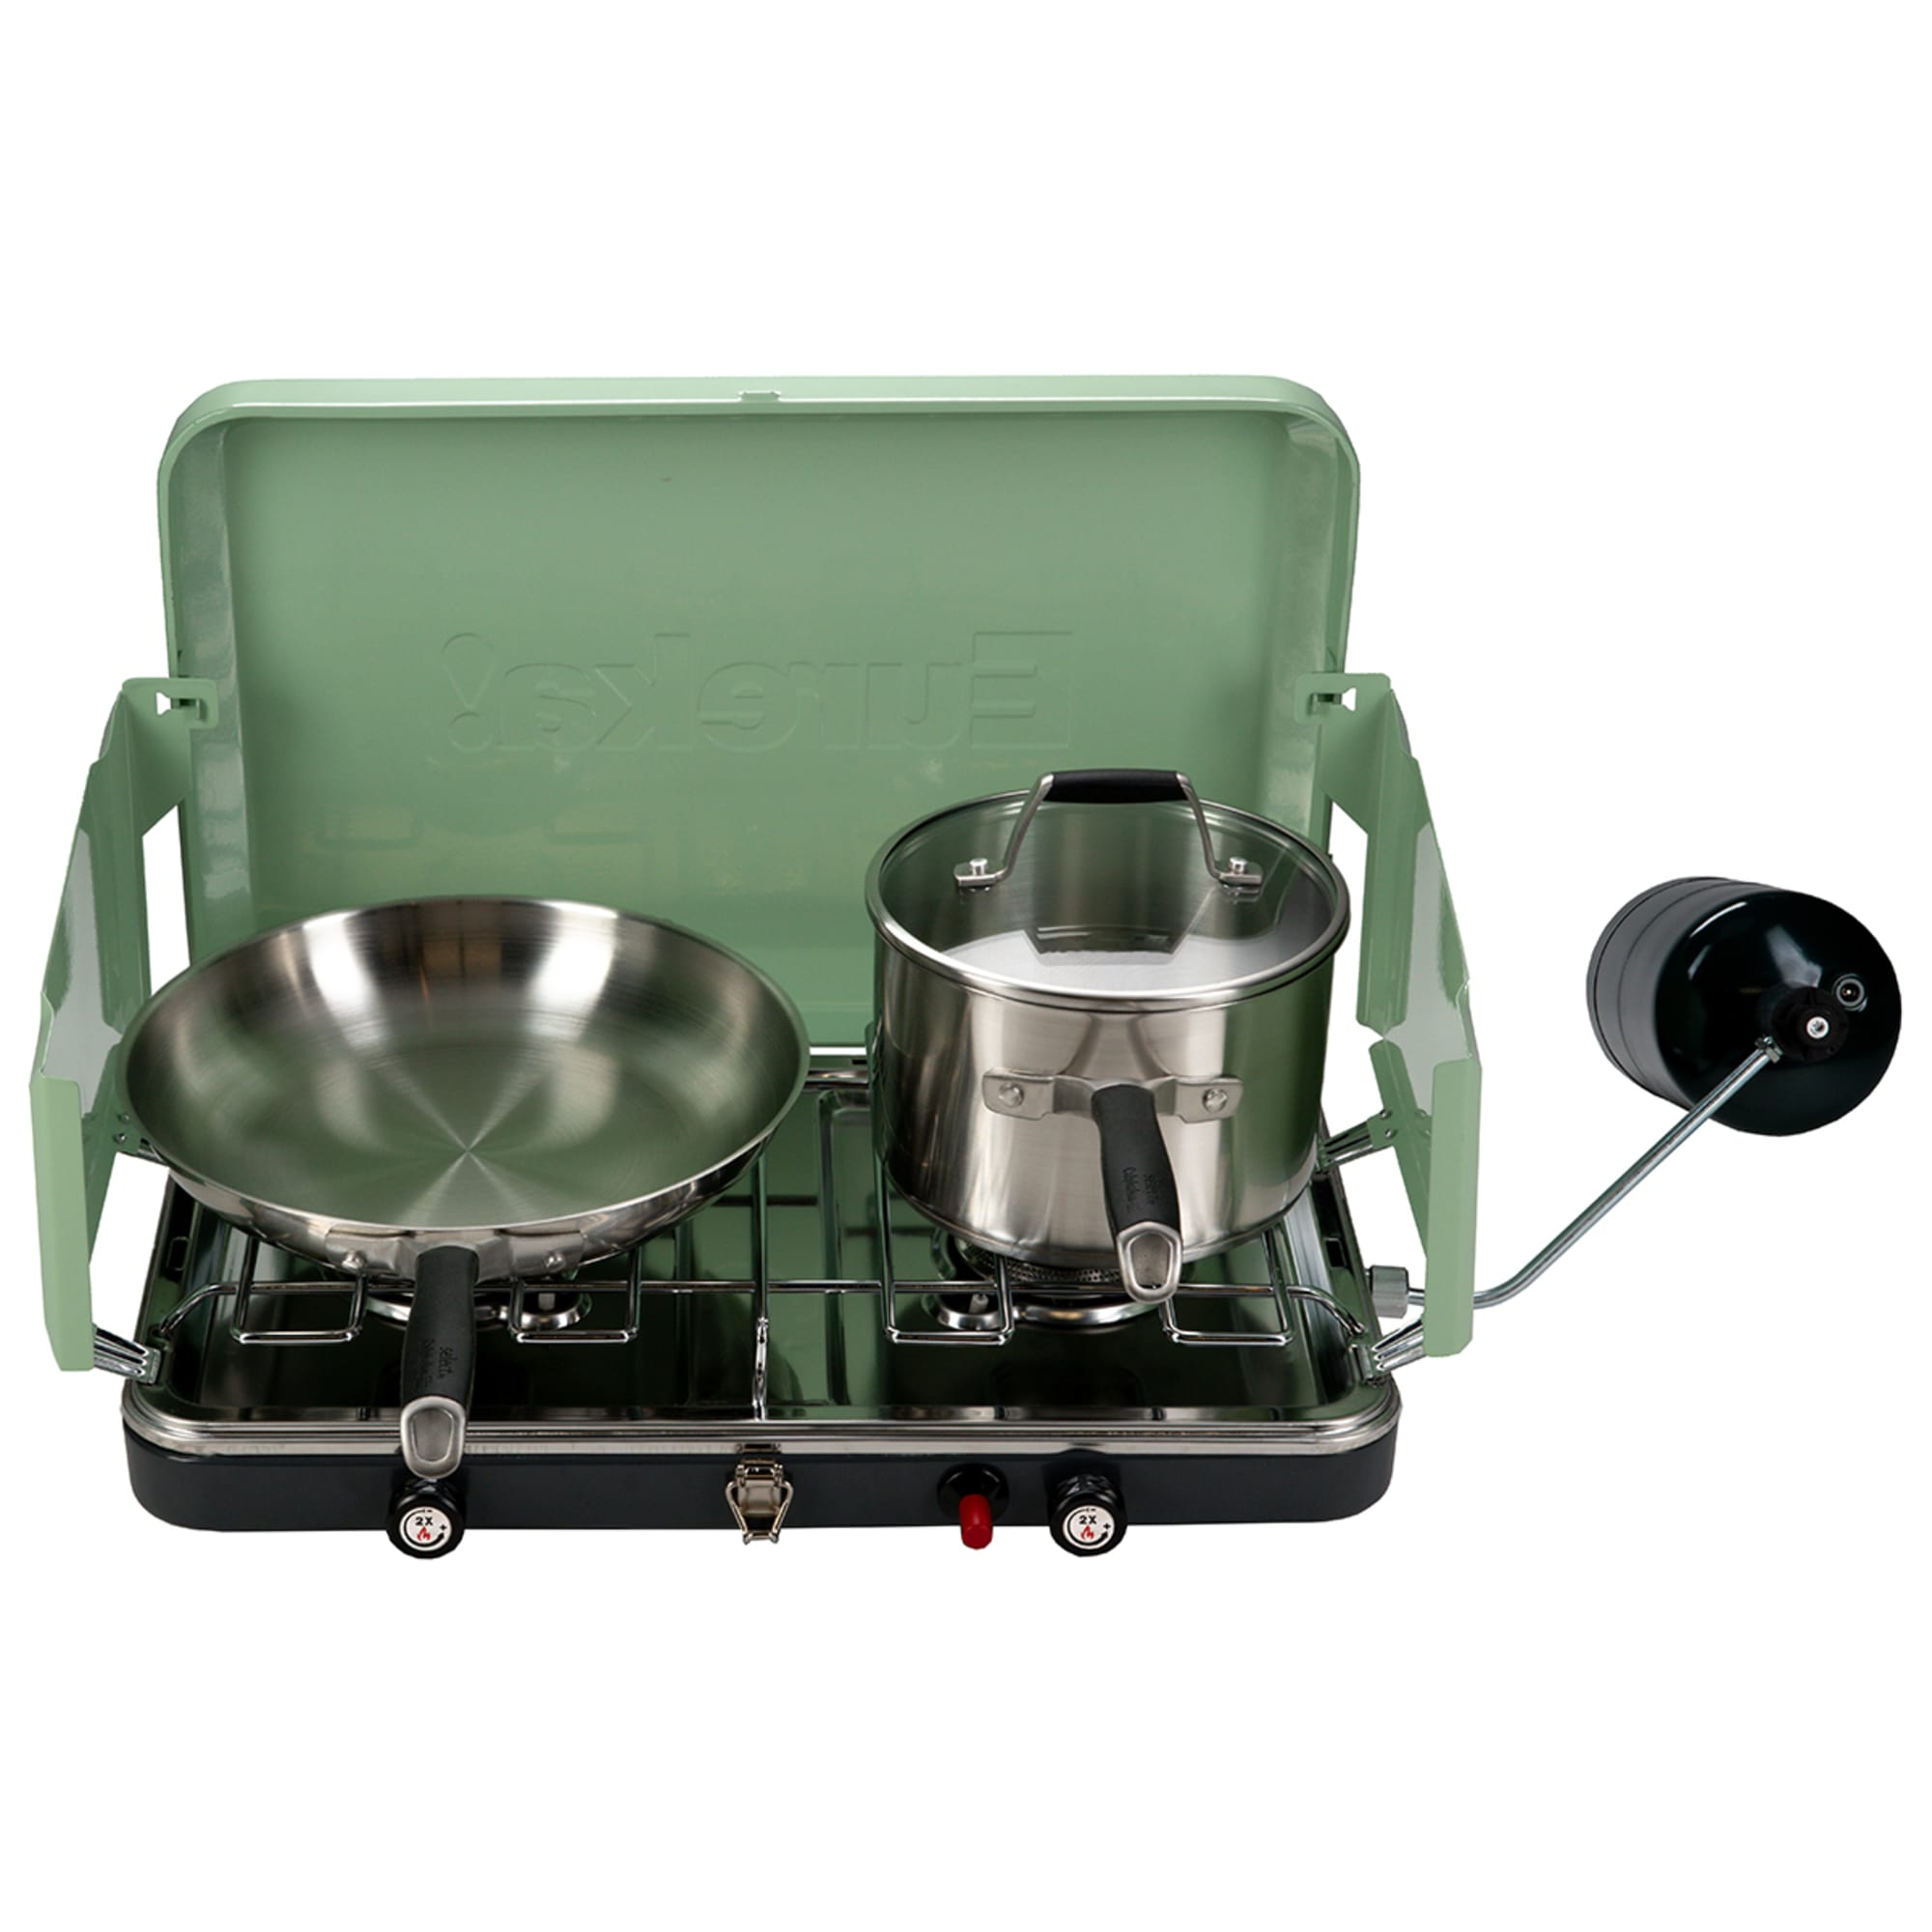 Honest Review of Eureka Ignite Camp Stove - Defiance Gear Co.